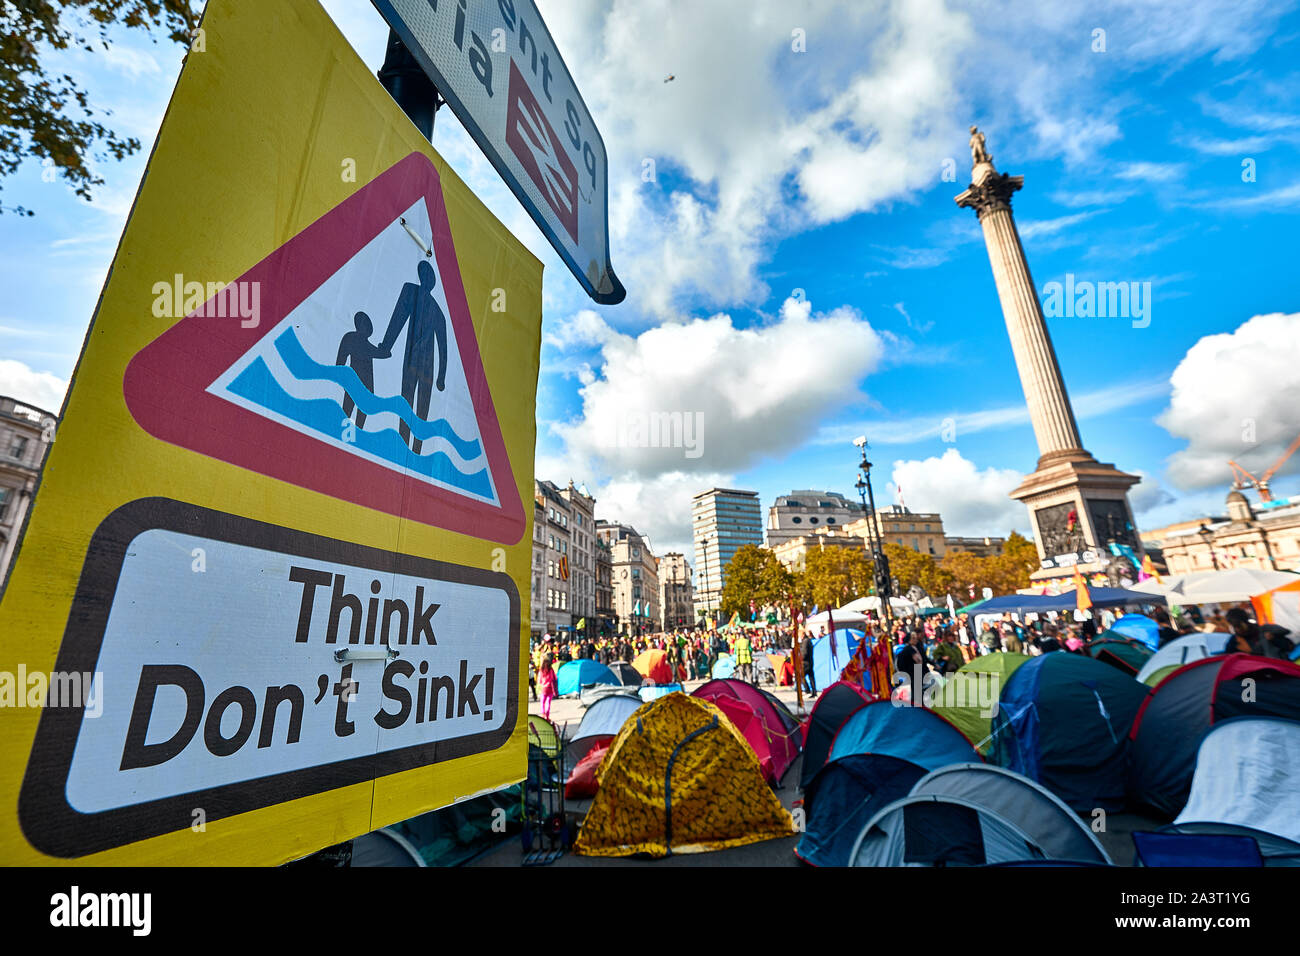 London, U.K. - Oct 9, 2019: A protest sign in Trafalgar Square next to tents belonging to environmental campaigners from Extinction Rebellion on the third day of a planned two weeks of protests. Stock Photo